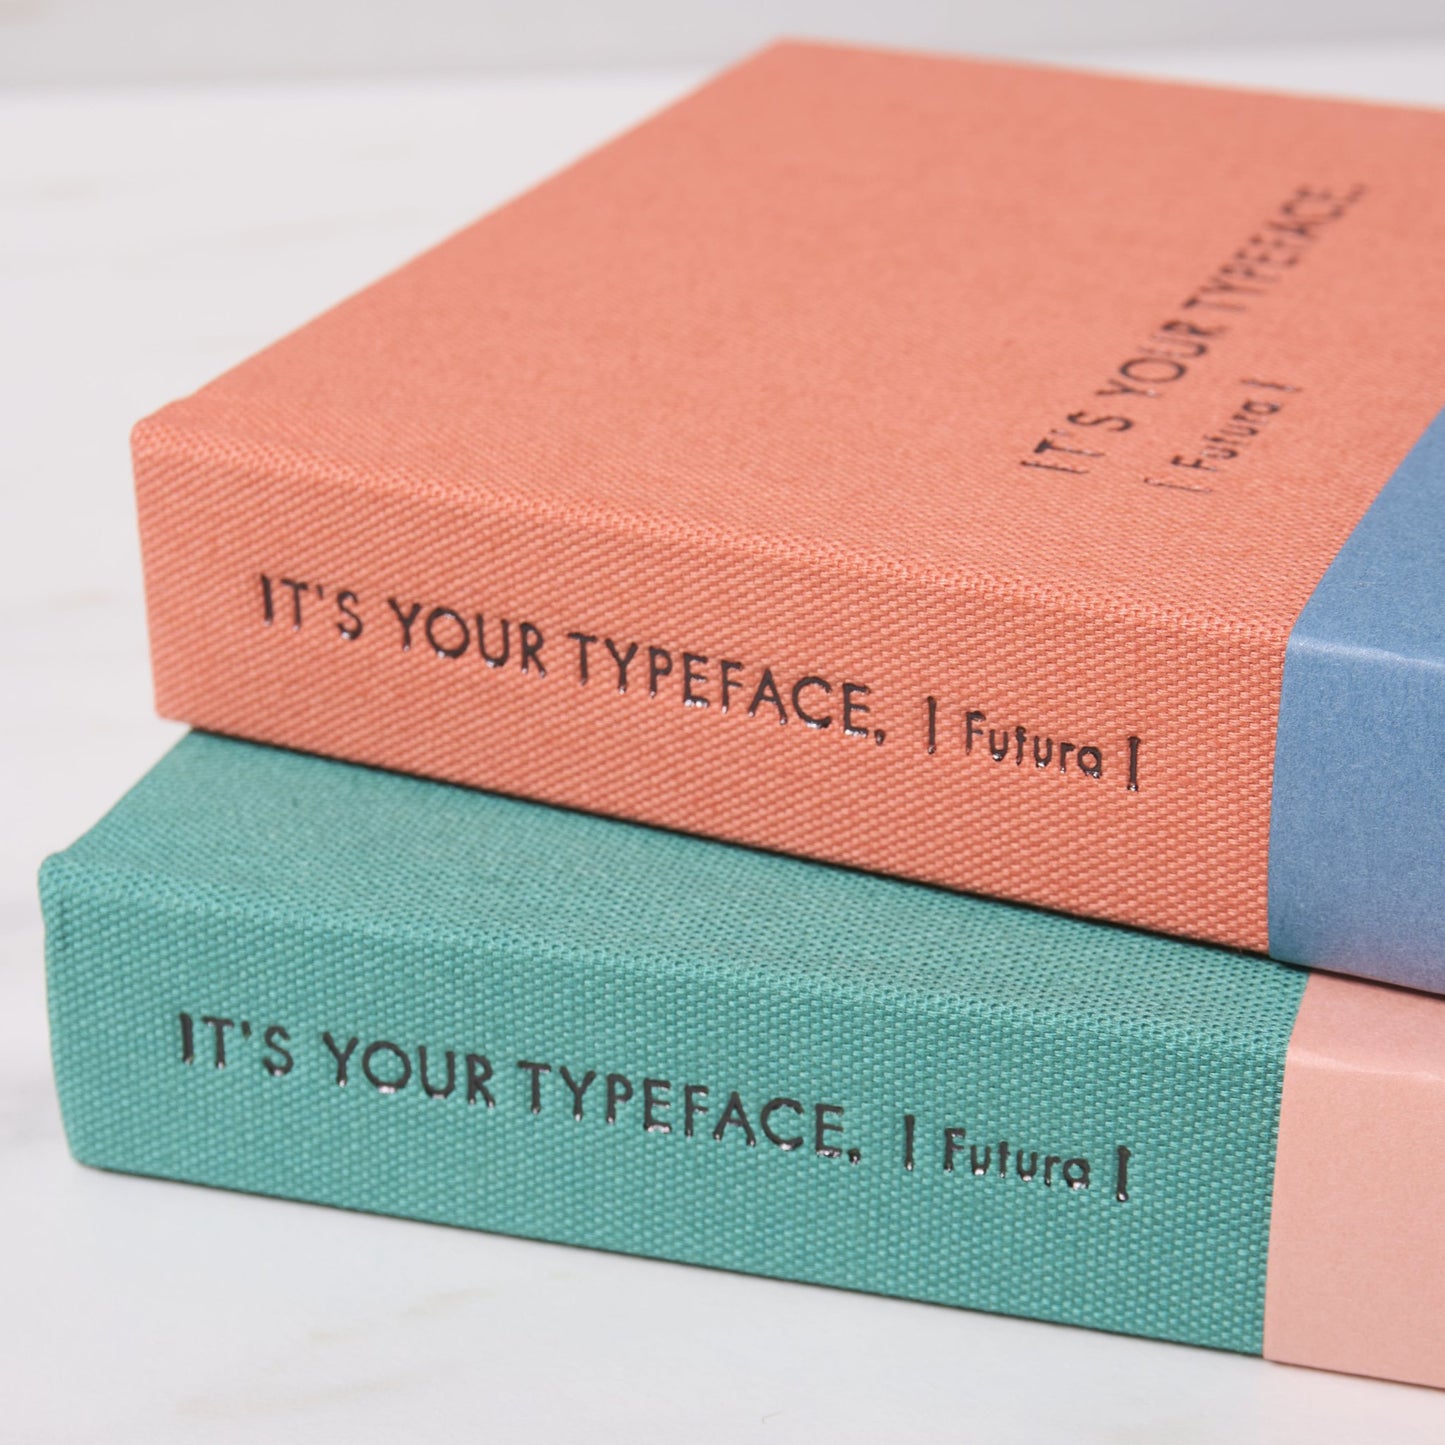 TYPEFACE NOTEBOOK A6 Size 365 Page Notebook - Futura / Letterpress Letters